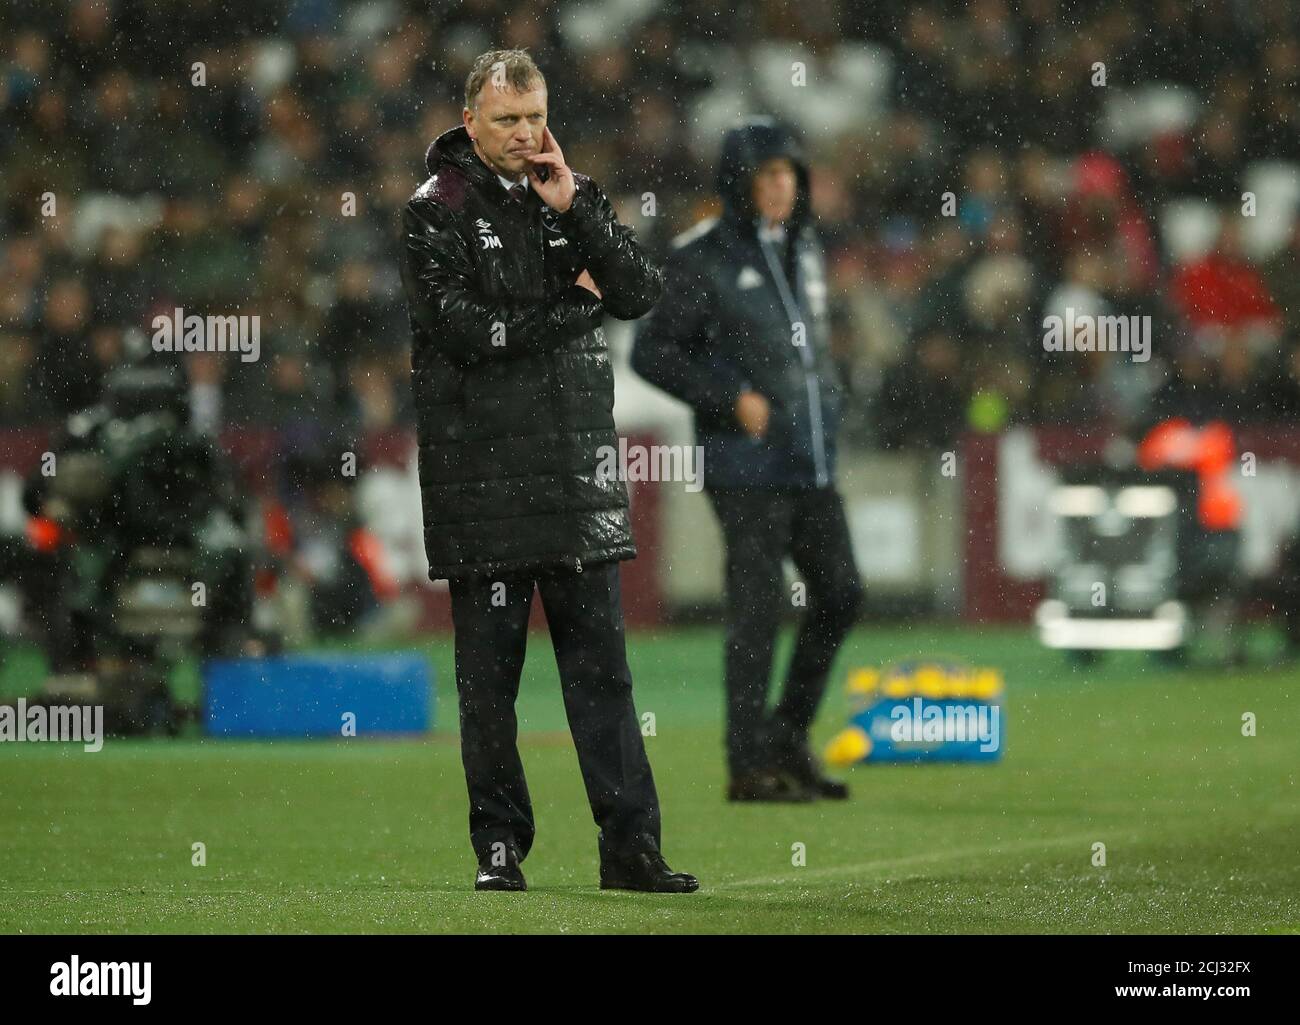 Soccer Football - Premier League - West Ham United vs West Bromwich Albion - London Stadium, London, Britain - January 2, 2018   West Ham United manager David Moyes and West Bromwich Albion manager Alan Pardew   REUTERS/Eddie Keogh    EDITORIAL USE ONLY. No use with unauthorized audio, video, data, fixture lists, club/league logos or 'live' services. Online in-match use limited to 75 images, no video emulation. No use in betting, games or single club/league/player publications.  Please contact your account representative for further details. Stock Photo